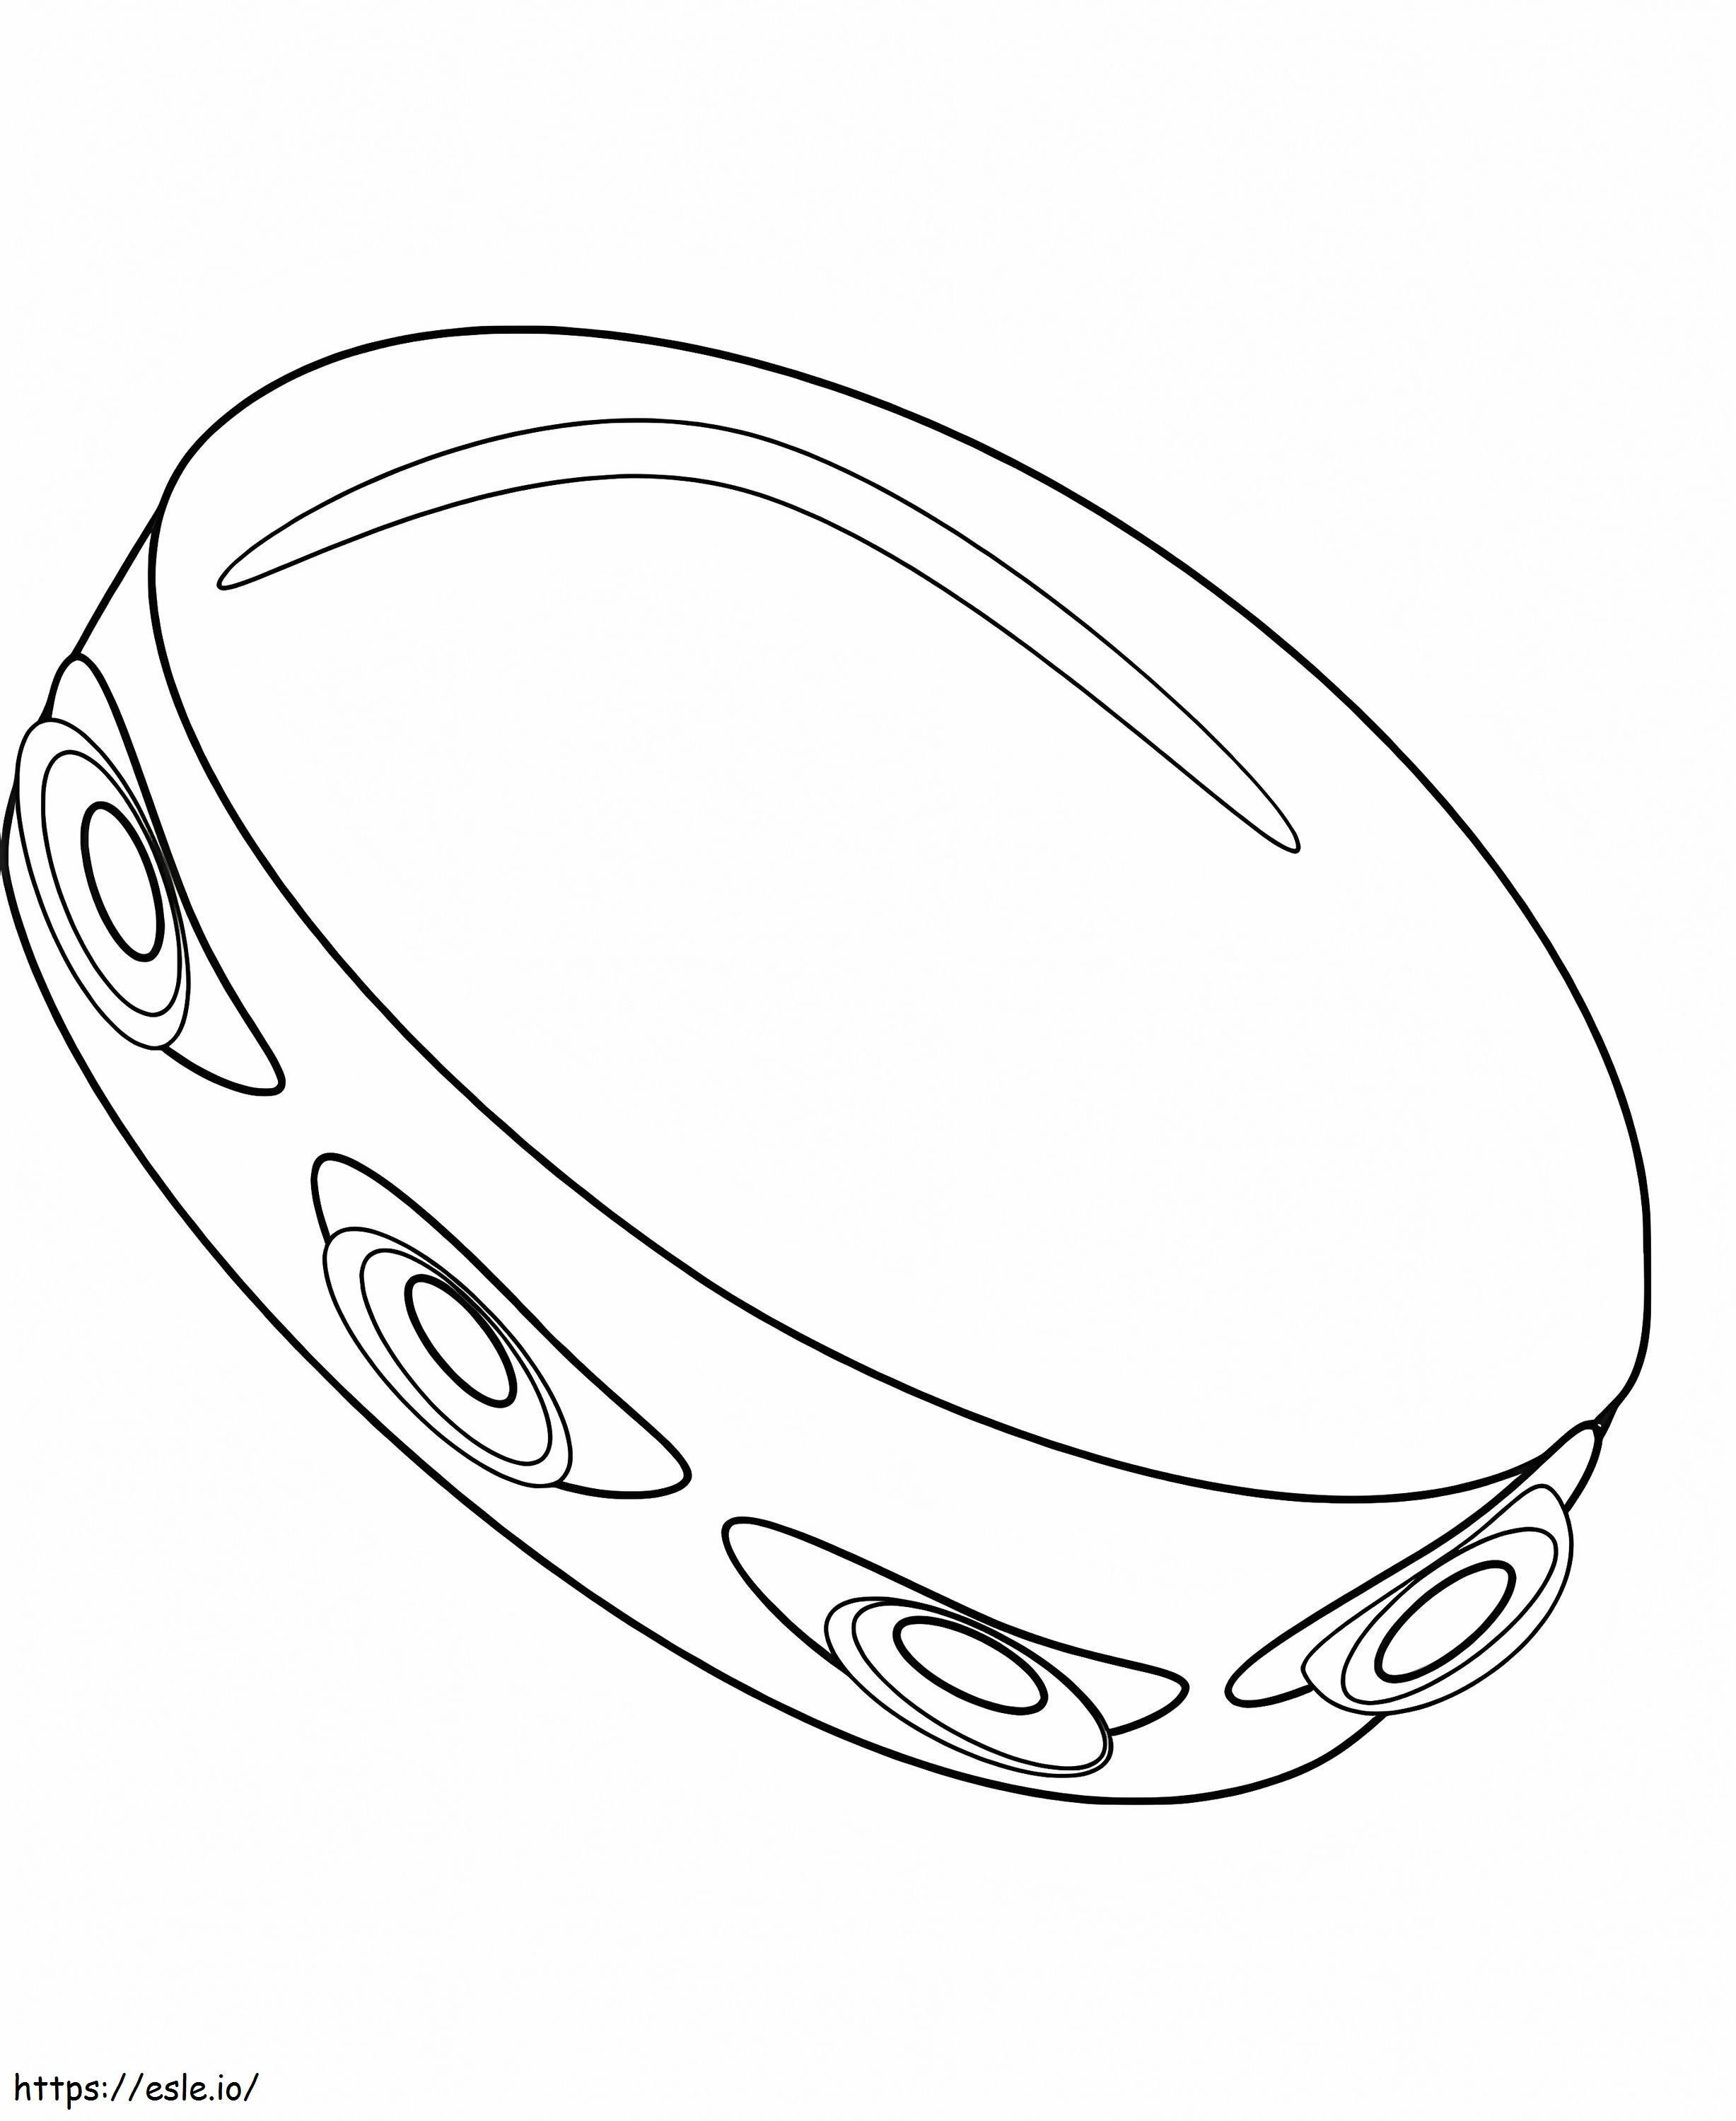 Normal Tambourine 2 coloring page